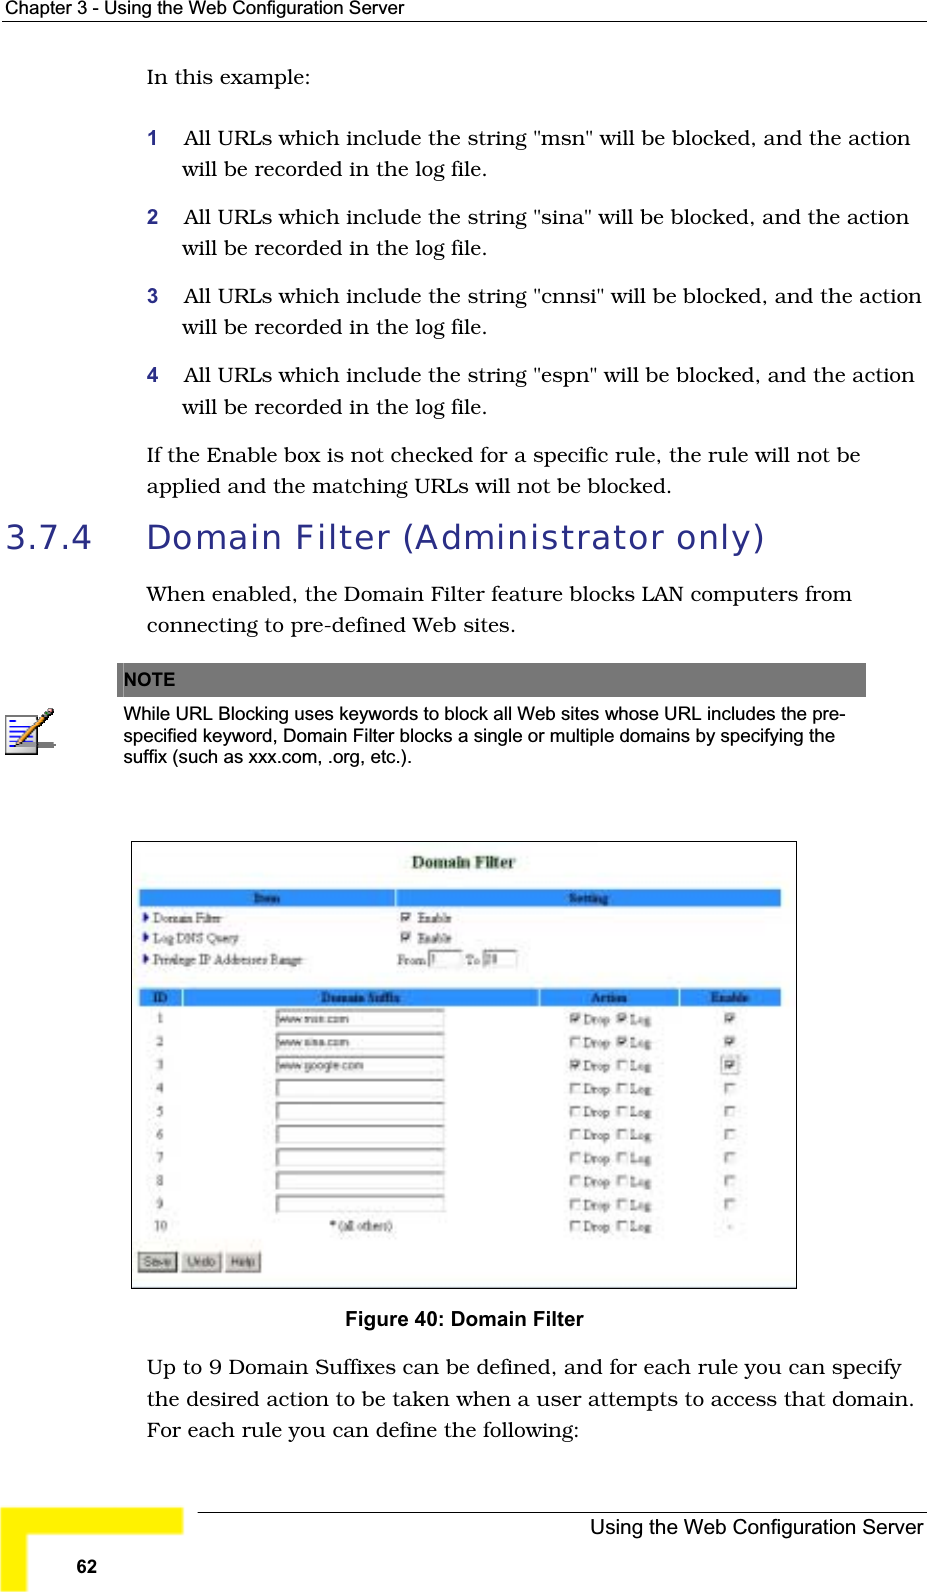 Chapter 3 - Using the Web Configuration ServerIn this example:1All URLs which include the string &quot;msn&quot; will be blocked, and the actionwill be recorded in the log file.2All URLs which include the string &quot;sina&quot; will be blocked, and the actionwill be recorded in the log file.3All URLs which include the string &quot;cnnsi&quot; will be blocked, and the action will be recorded in the log file.4All URLs which include the string &quot;espn&quot; will be blocked, and the actionwill be recorded in the log file.If the Enable box is not checked for a specific rule, the rule will not beapplied and the matching URLs will not be blocked.3.7.4 Domain Filter (Administrator only) When enabled, the Domain Filter feature blocks LAN computers fromconnecting to pre-defined Web sites.NOTEWhile URL Blocking uses keywords to block all Web sites whose URL includes the pre-specified keyword, Domain Filter blocks a single or multiple domains by specifying the suffix (such as xxx.com, .org, etc.). Figure 40: Domain Filter Up to 9 Domain Suffixes can be defined, and for each rule you can specifythe desired action to be taken when a user attempts to access that domain. For each rule you can define the following:Using the Web Configuration Server62